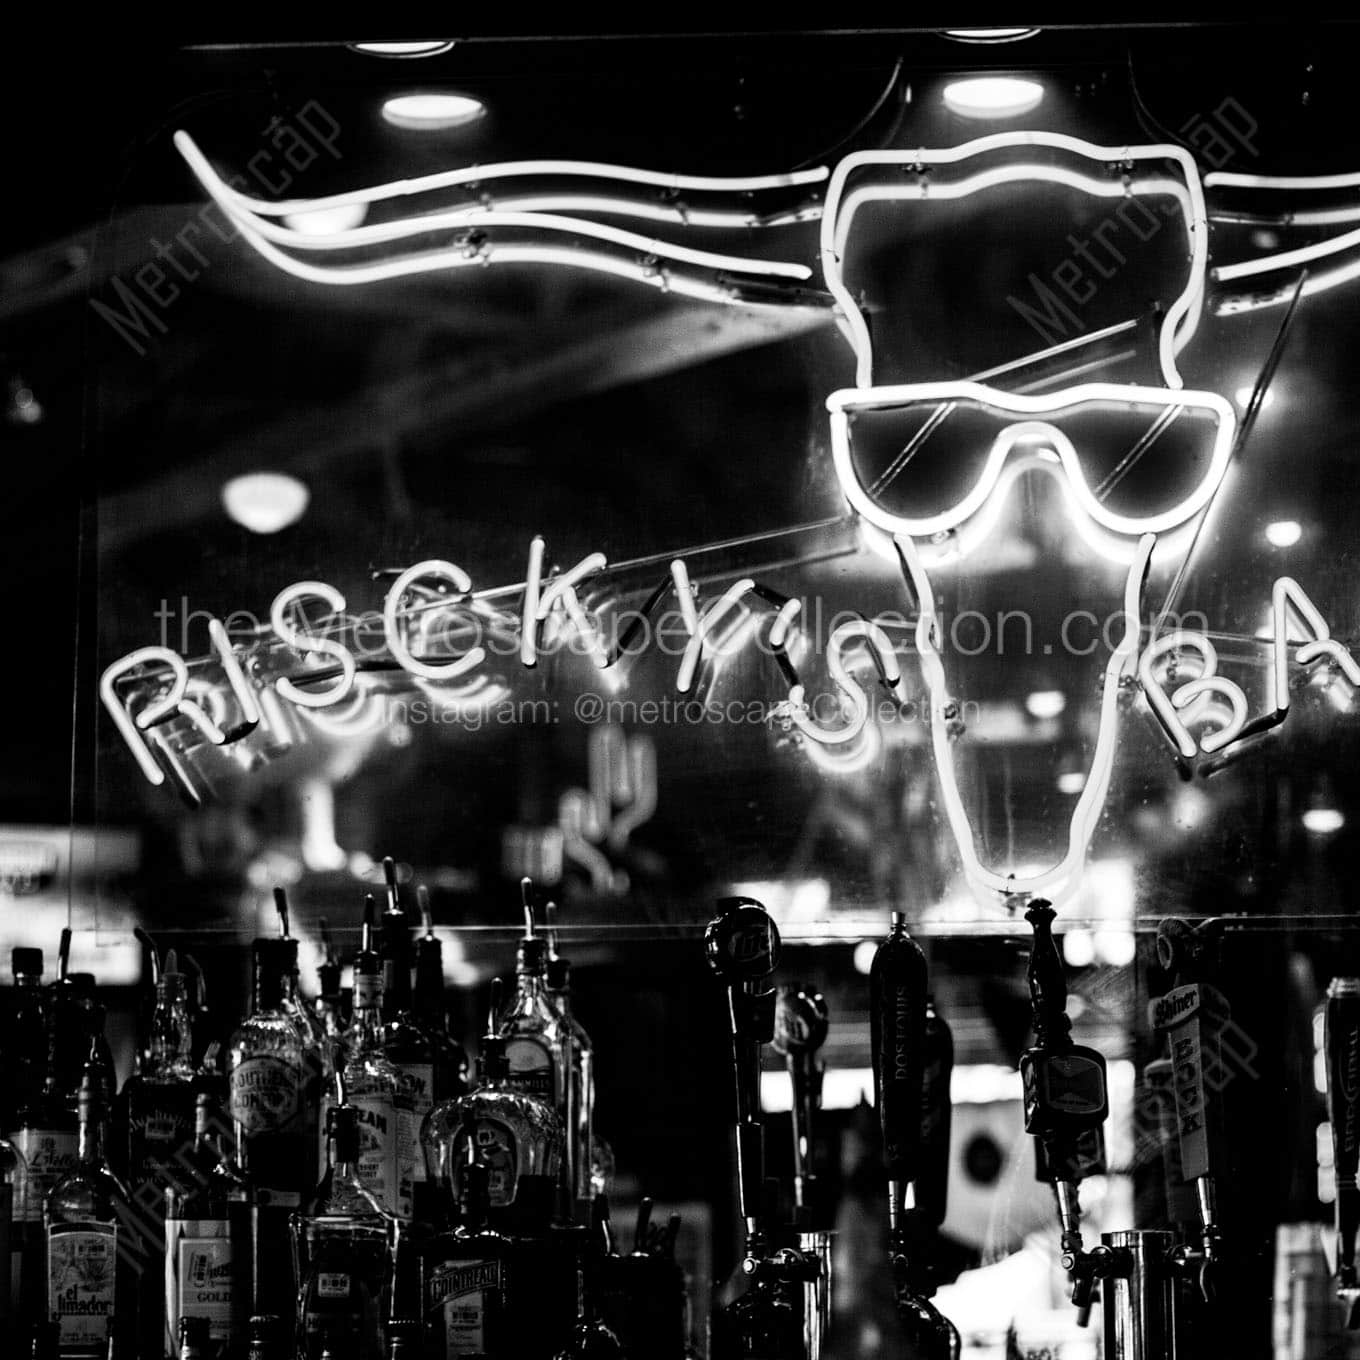 risckys barbeque Black & White Wall Art